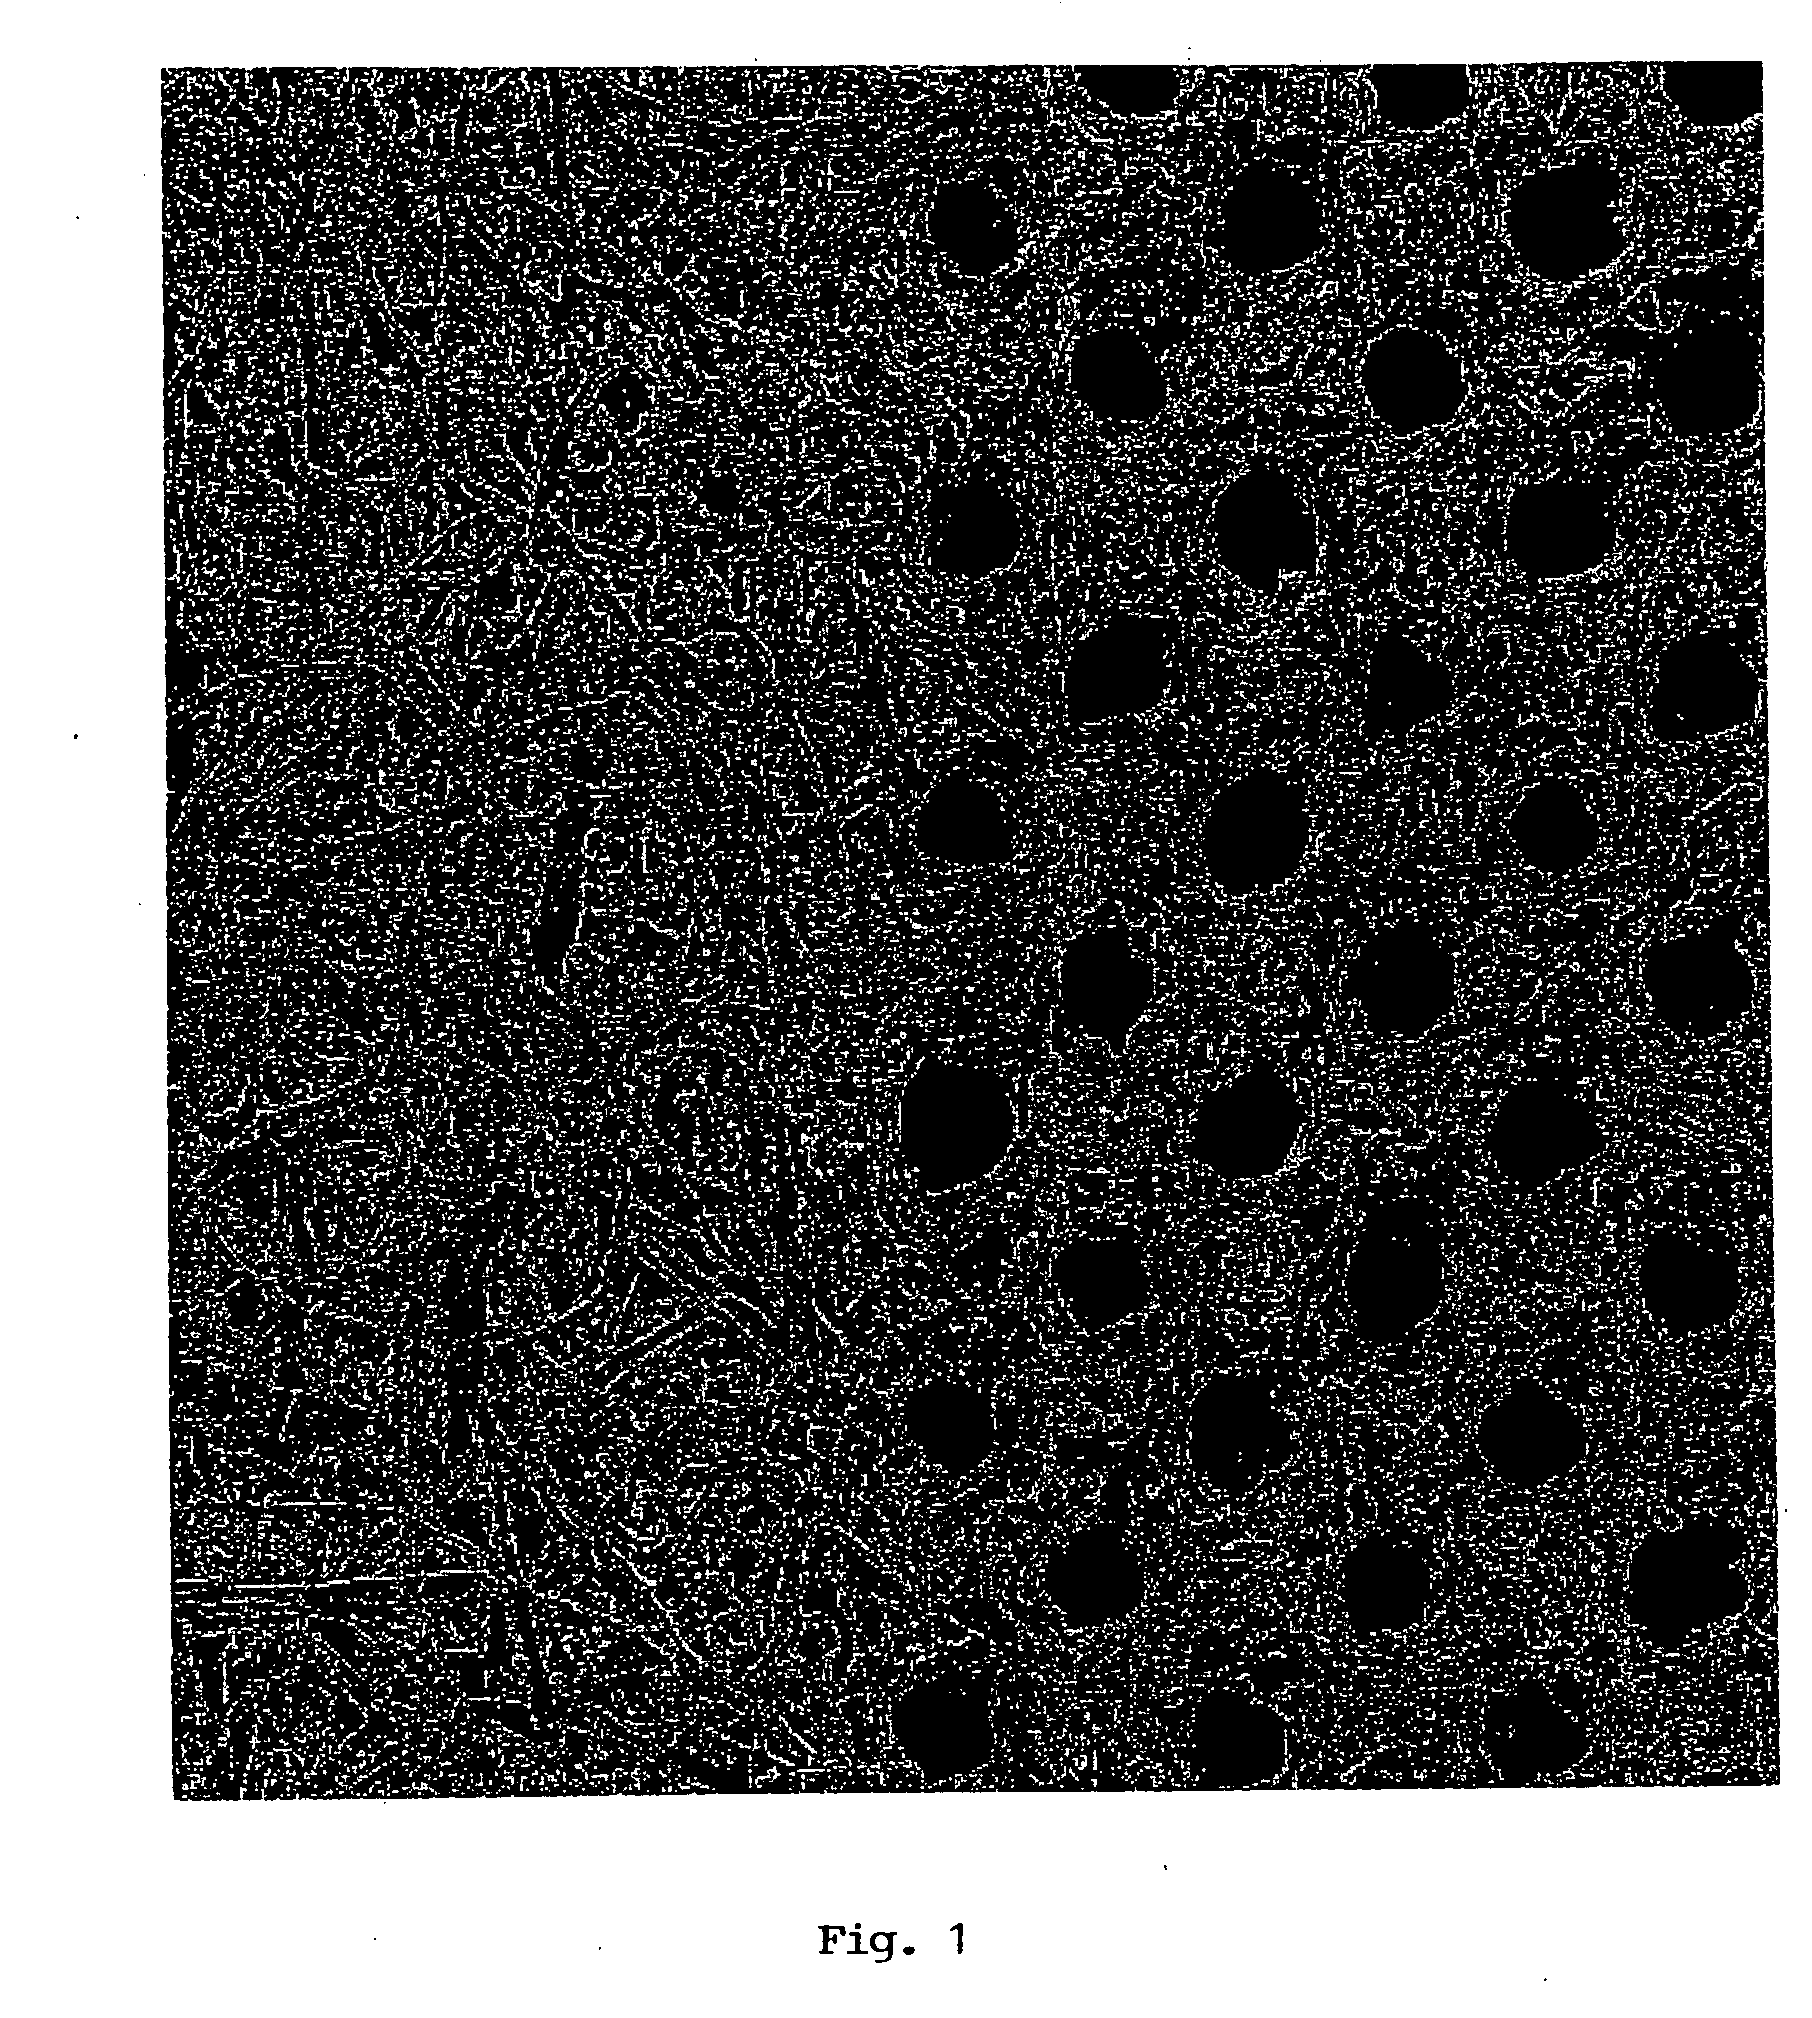 Transparent paper and method of making same